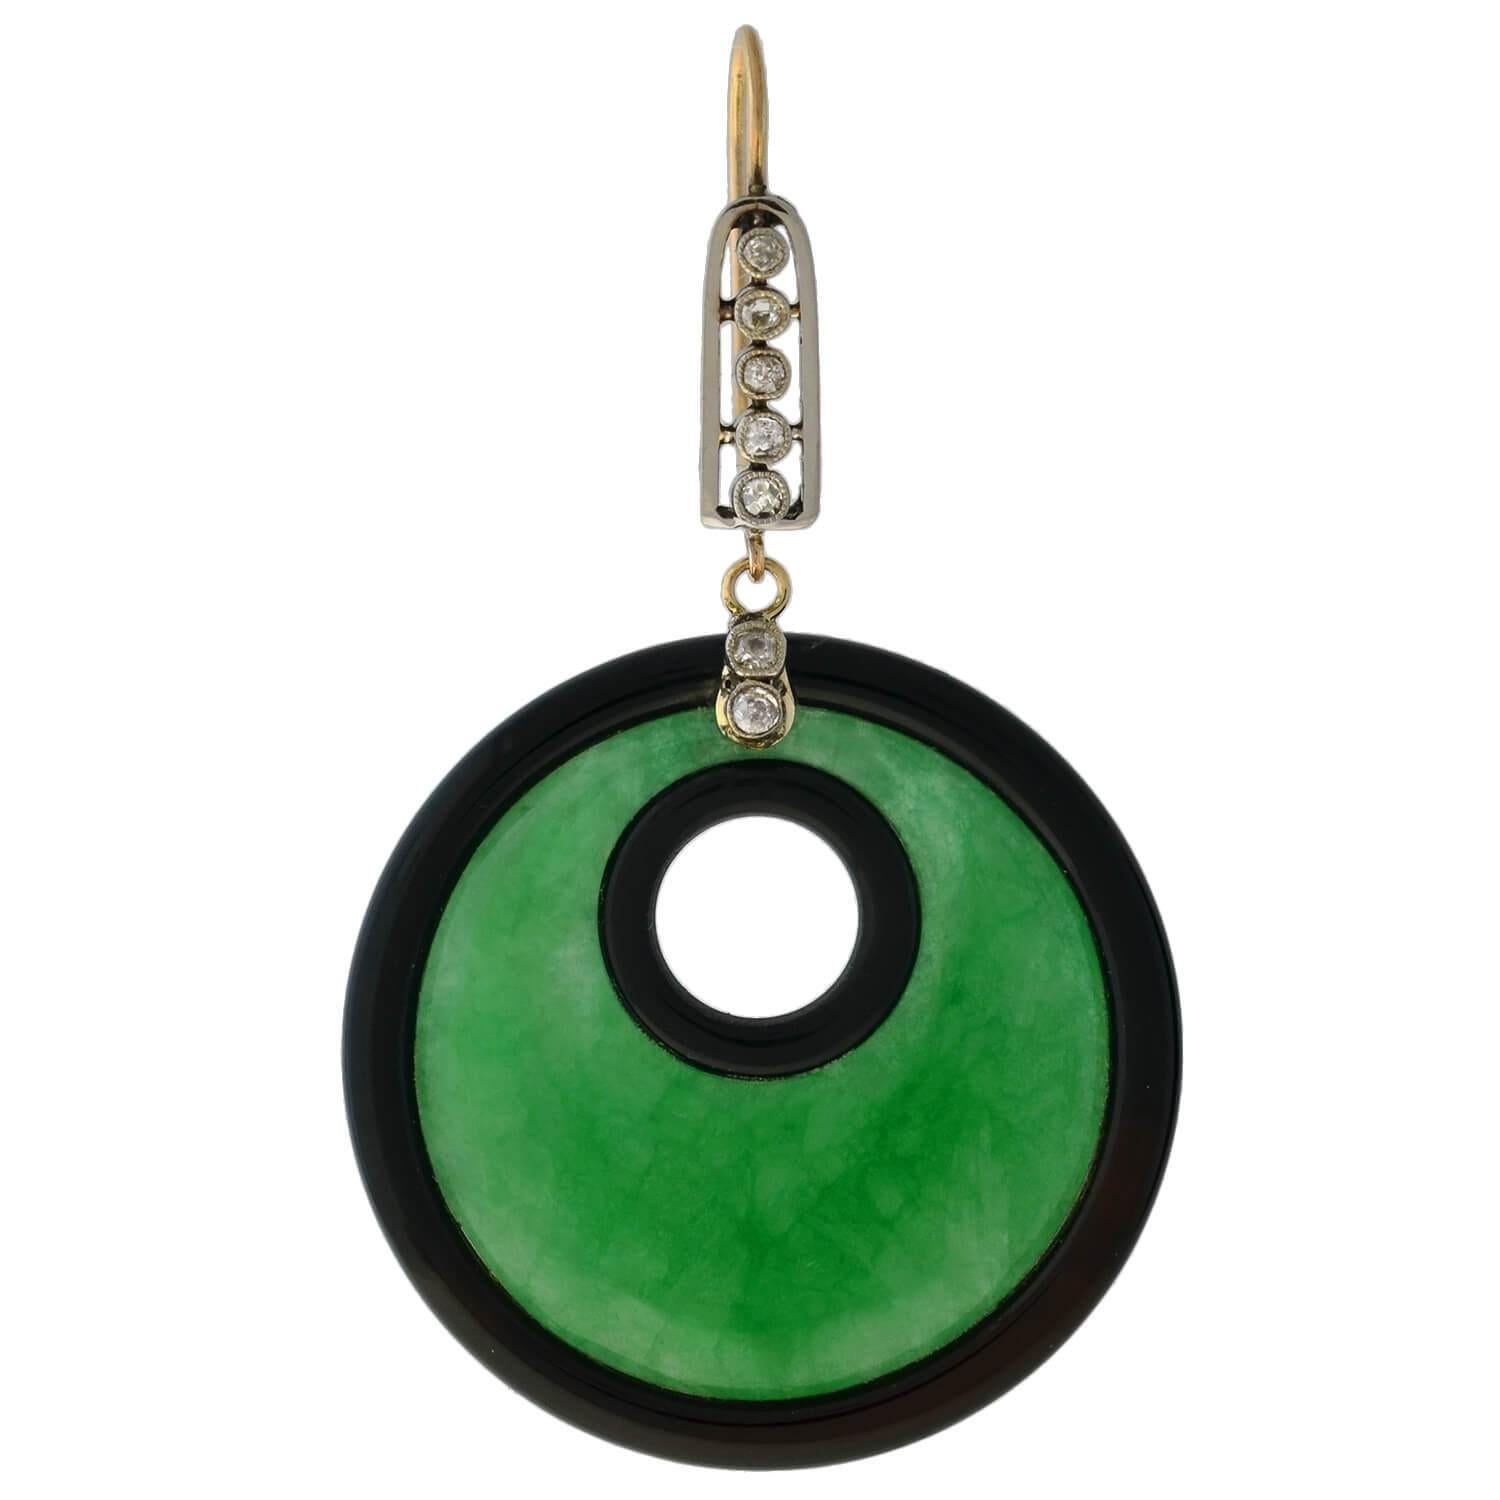 An impressive pair of statement earrings from the Art Deco (ca1930) era! Each earring features a large jadeite hoop at the base, which is hugged by two rings of black onyx, forming an inner and outer border. In person, the jadeite displays a